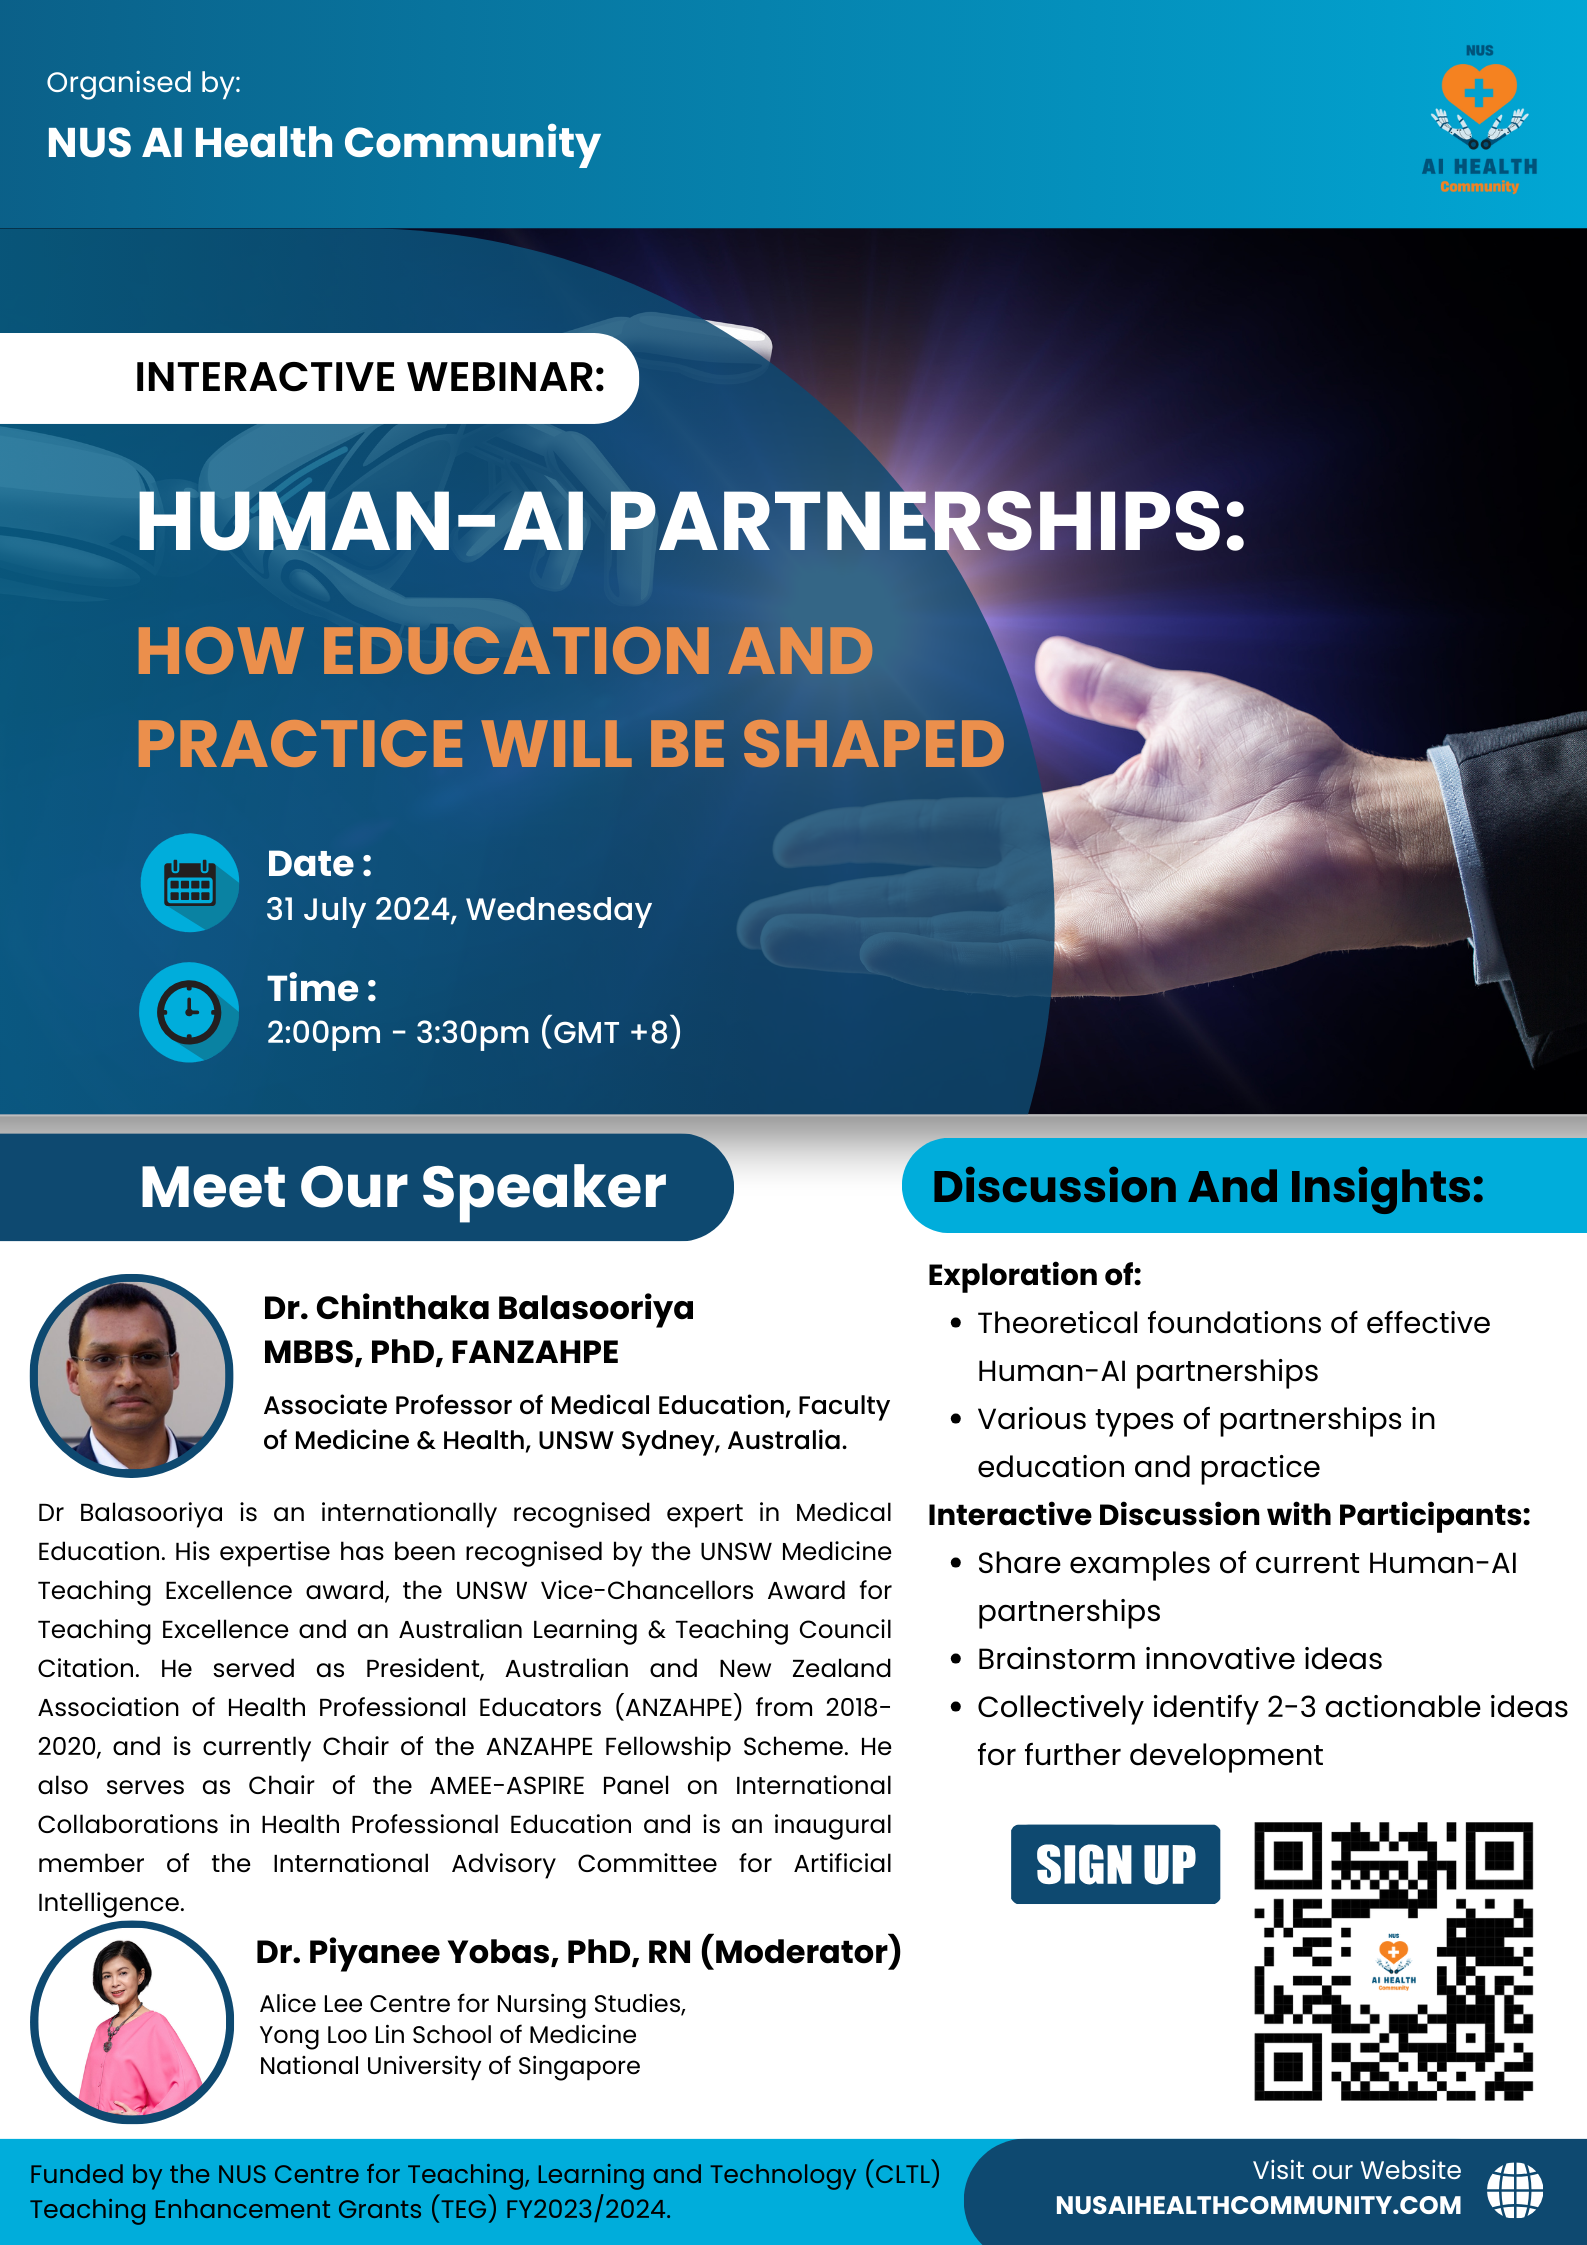 Human-AI Partnerships: How Education and Practice will be Shaped